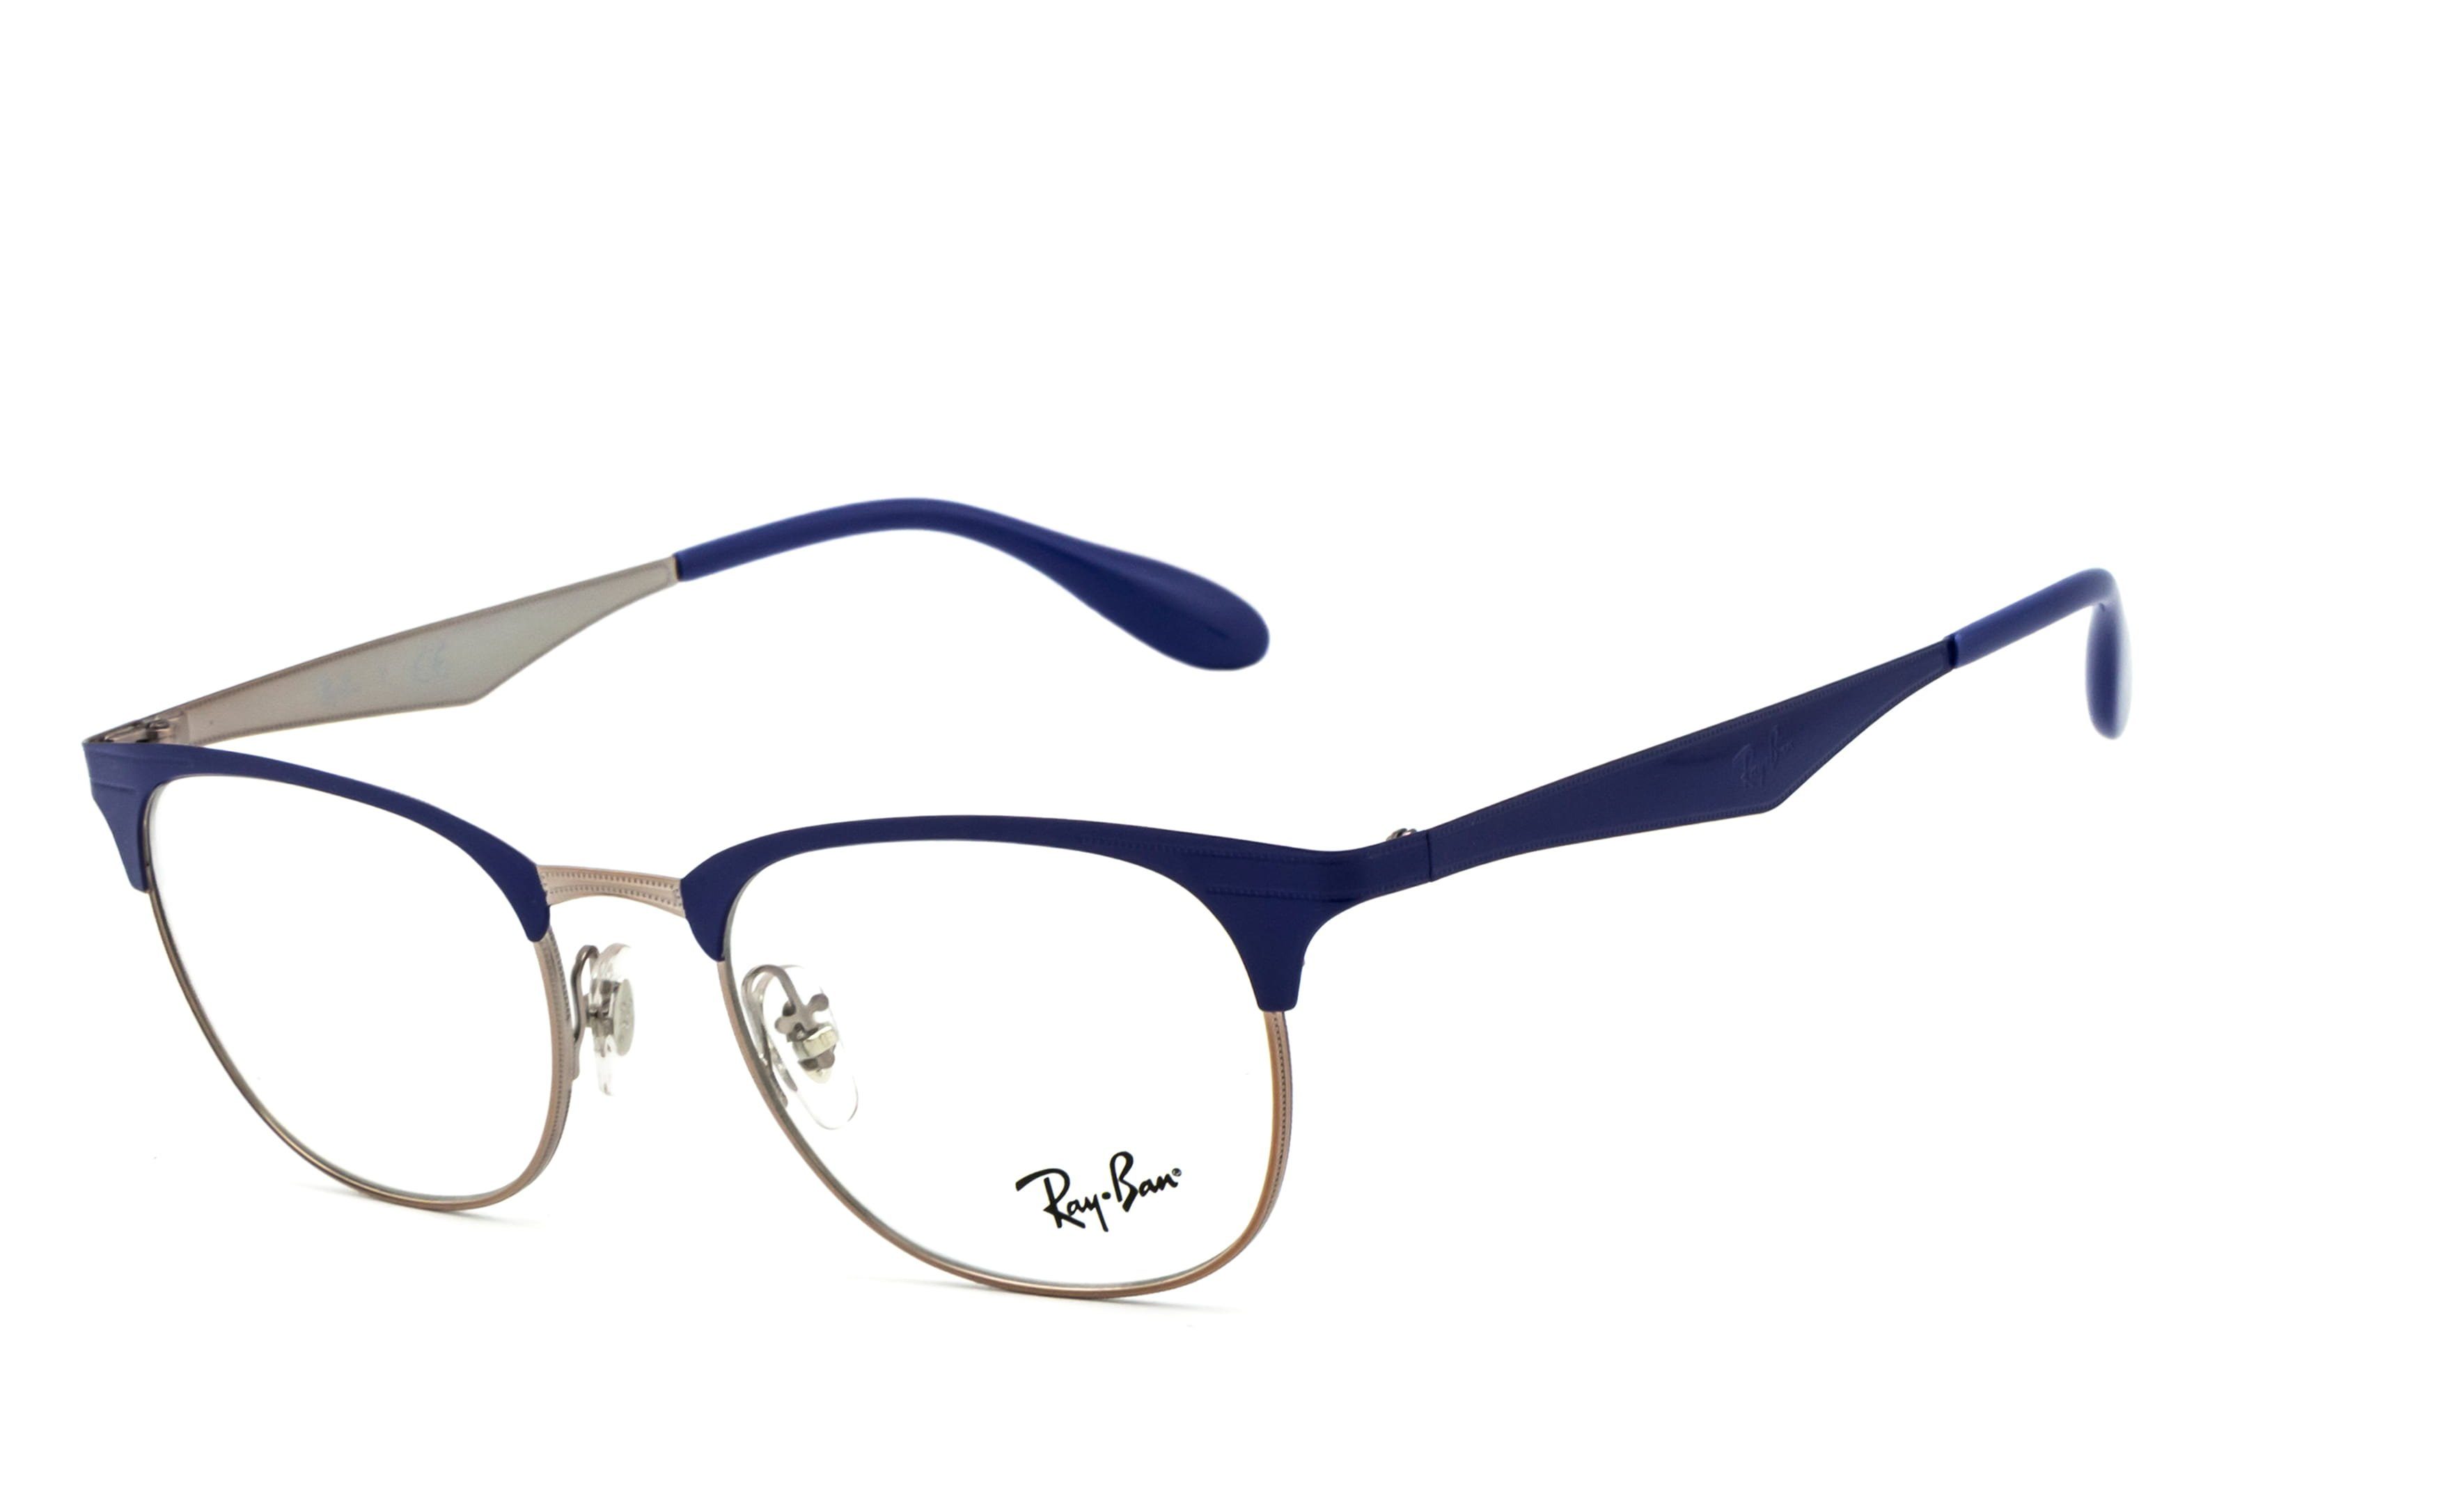 Ray-Ban Brille RB6346bl-n